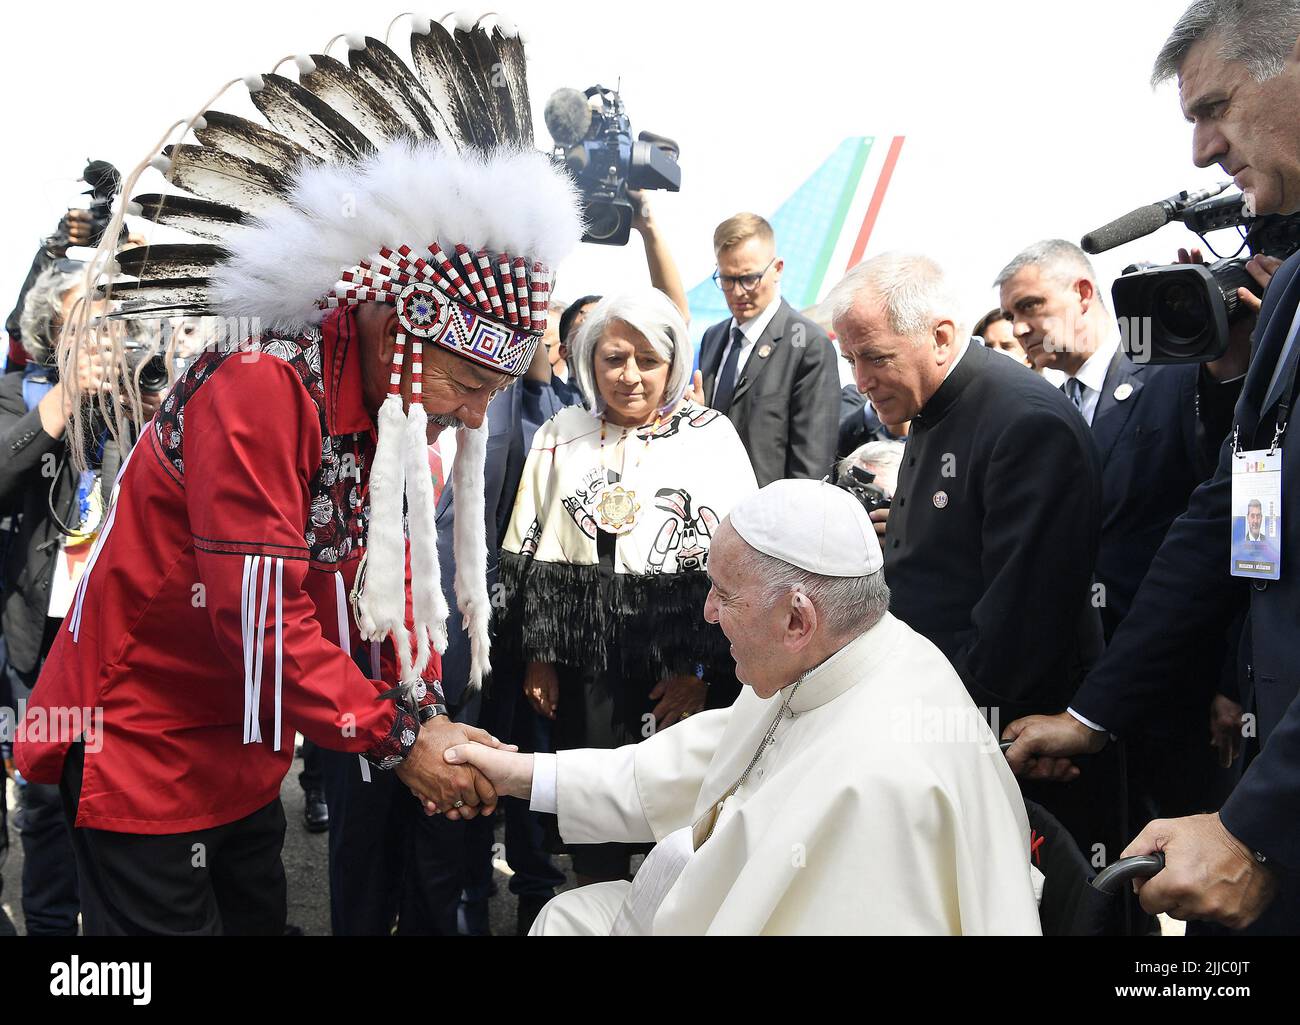 Edmonton, Canada. 24th July, 2022. Pope Francis greets George Arcand (left), Grand Chief of the Confederacy of Treaty Six First Nations during his welcoming ceremony at Edmonton International Airport, AB, western Canada on July 24, 2022 for his six-day papal visit across Canada. Pope's visit to Canada is aimed at reconciliation with Indigenous people for the Catholic Church's role in residential schools. Photo by Vatican Media (EV)/ABACAPRESS.COM Credit: Abaca Press/Alamy Live News Stock Photo